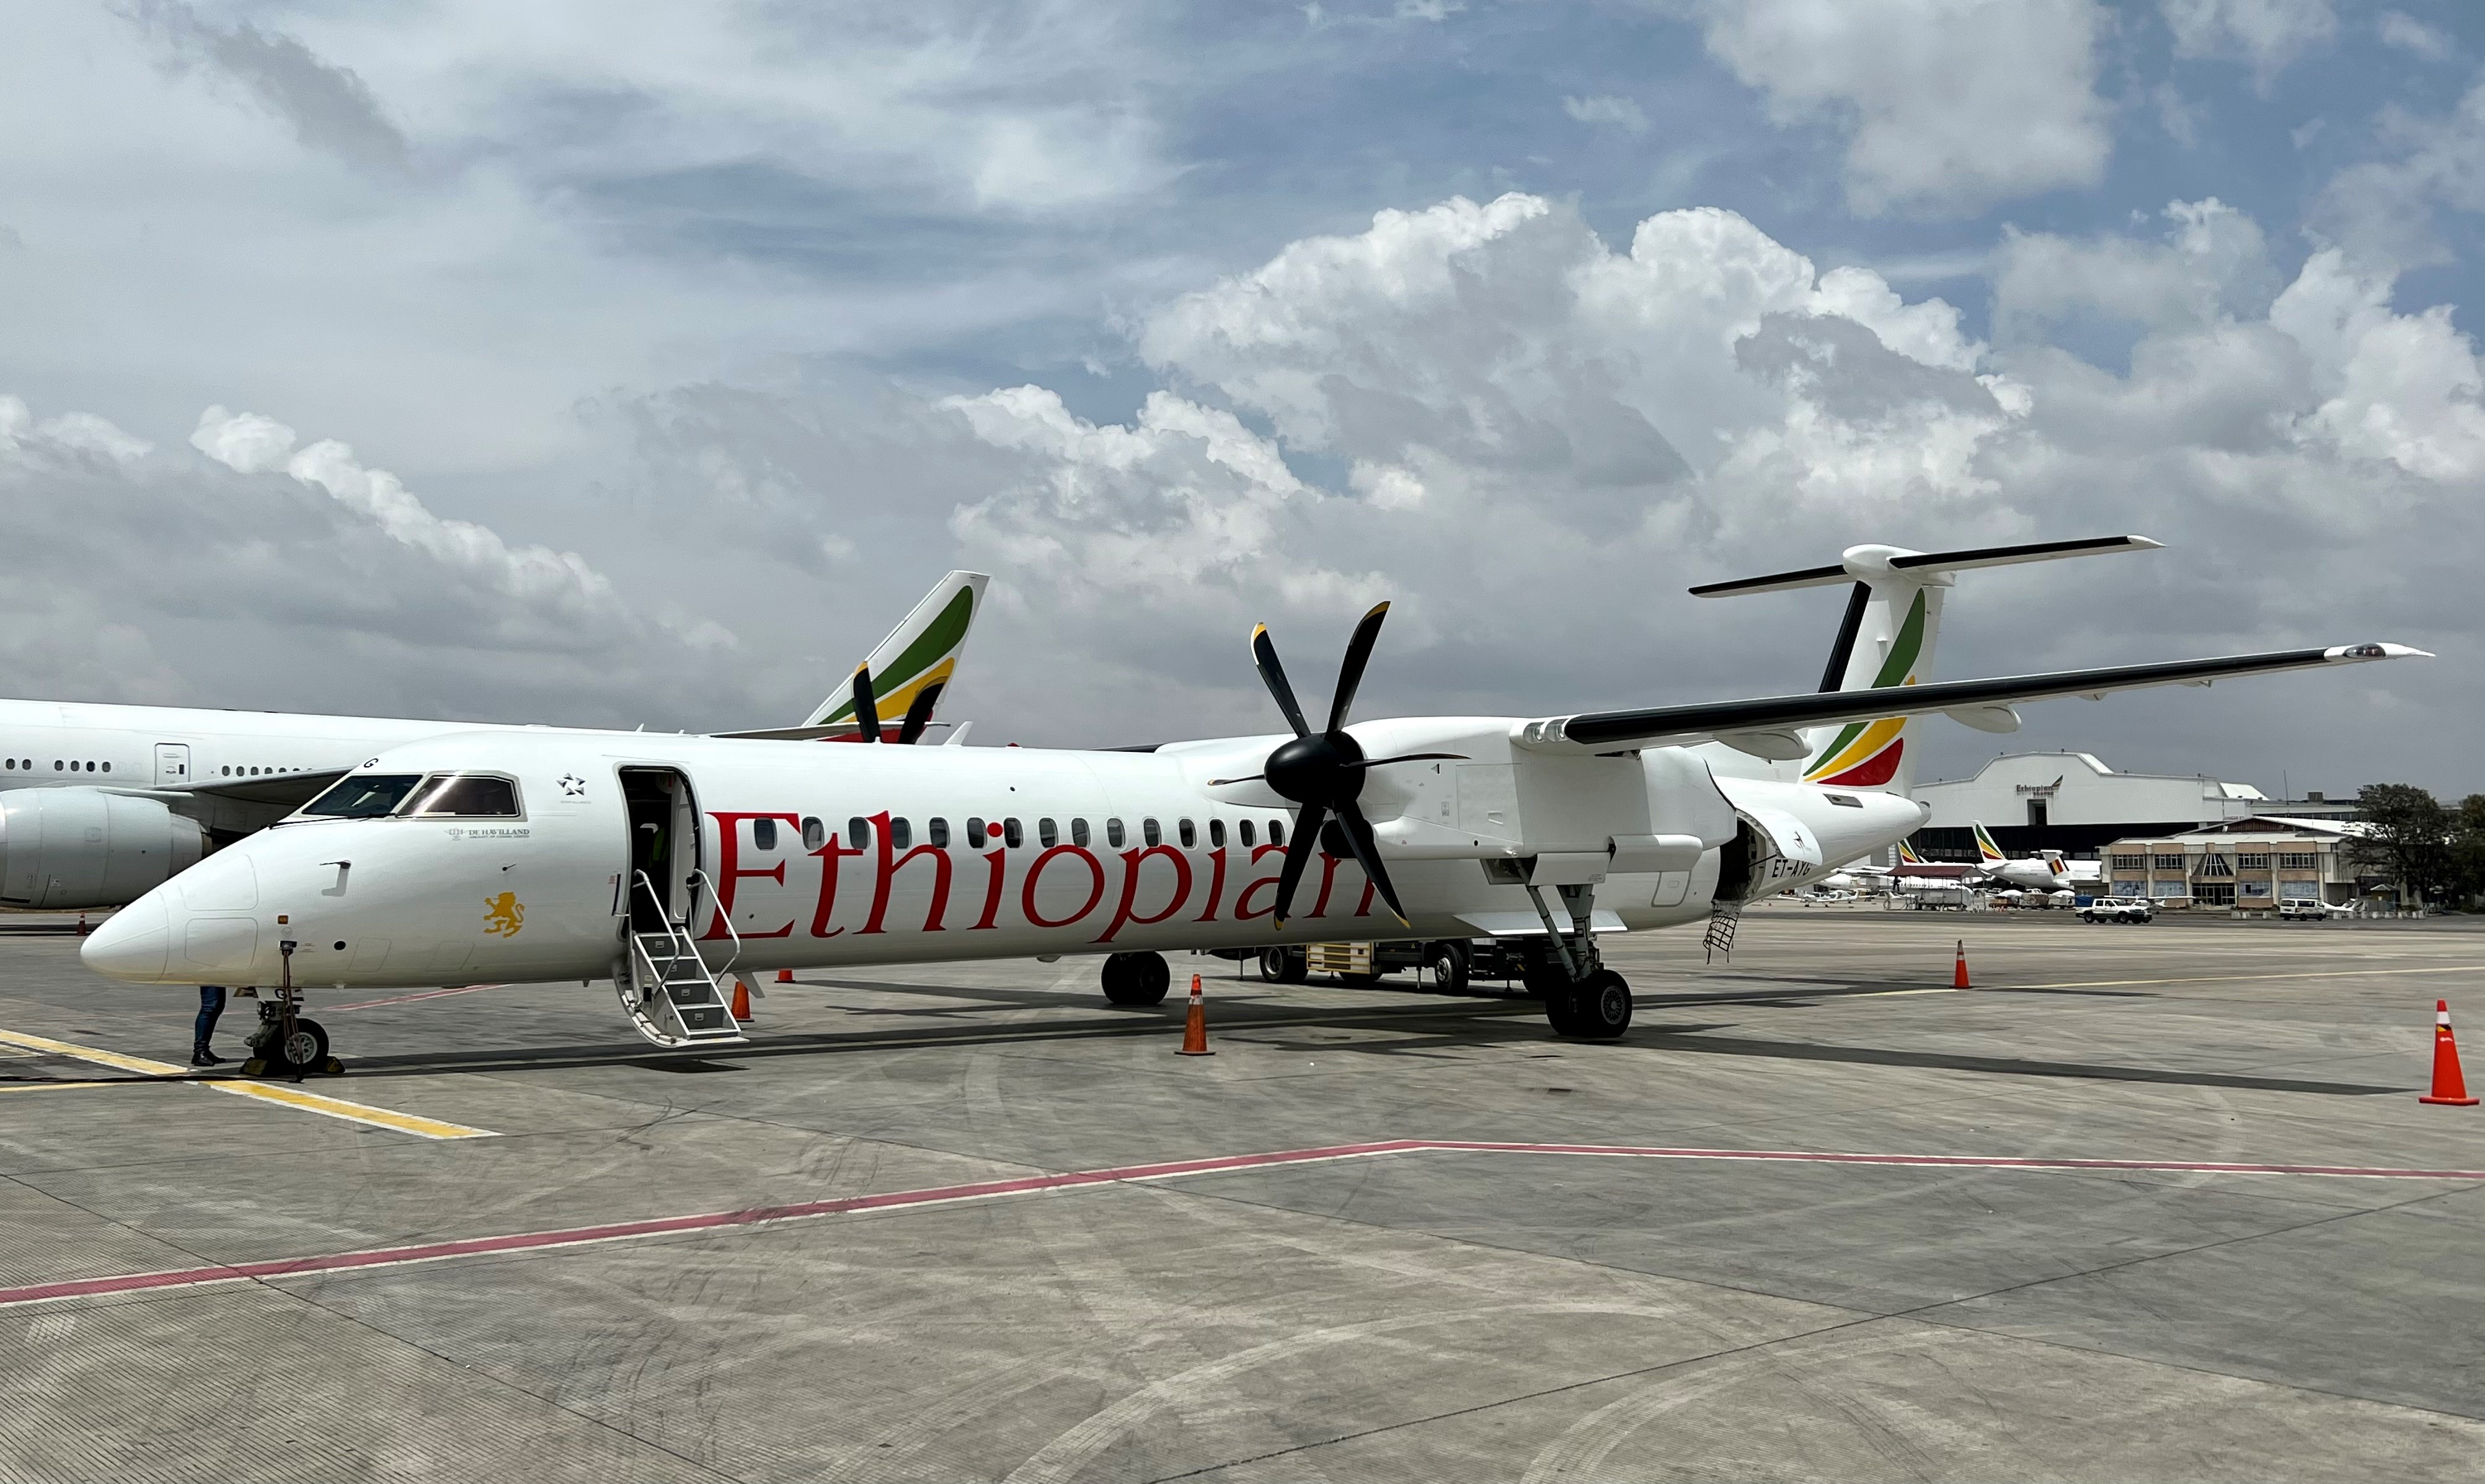 Ethiopian Airlines leases two Dash 8-400 aircraft from TrueNoord